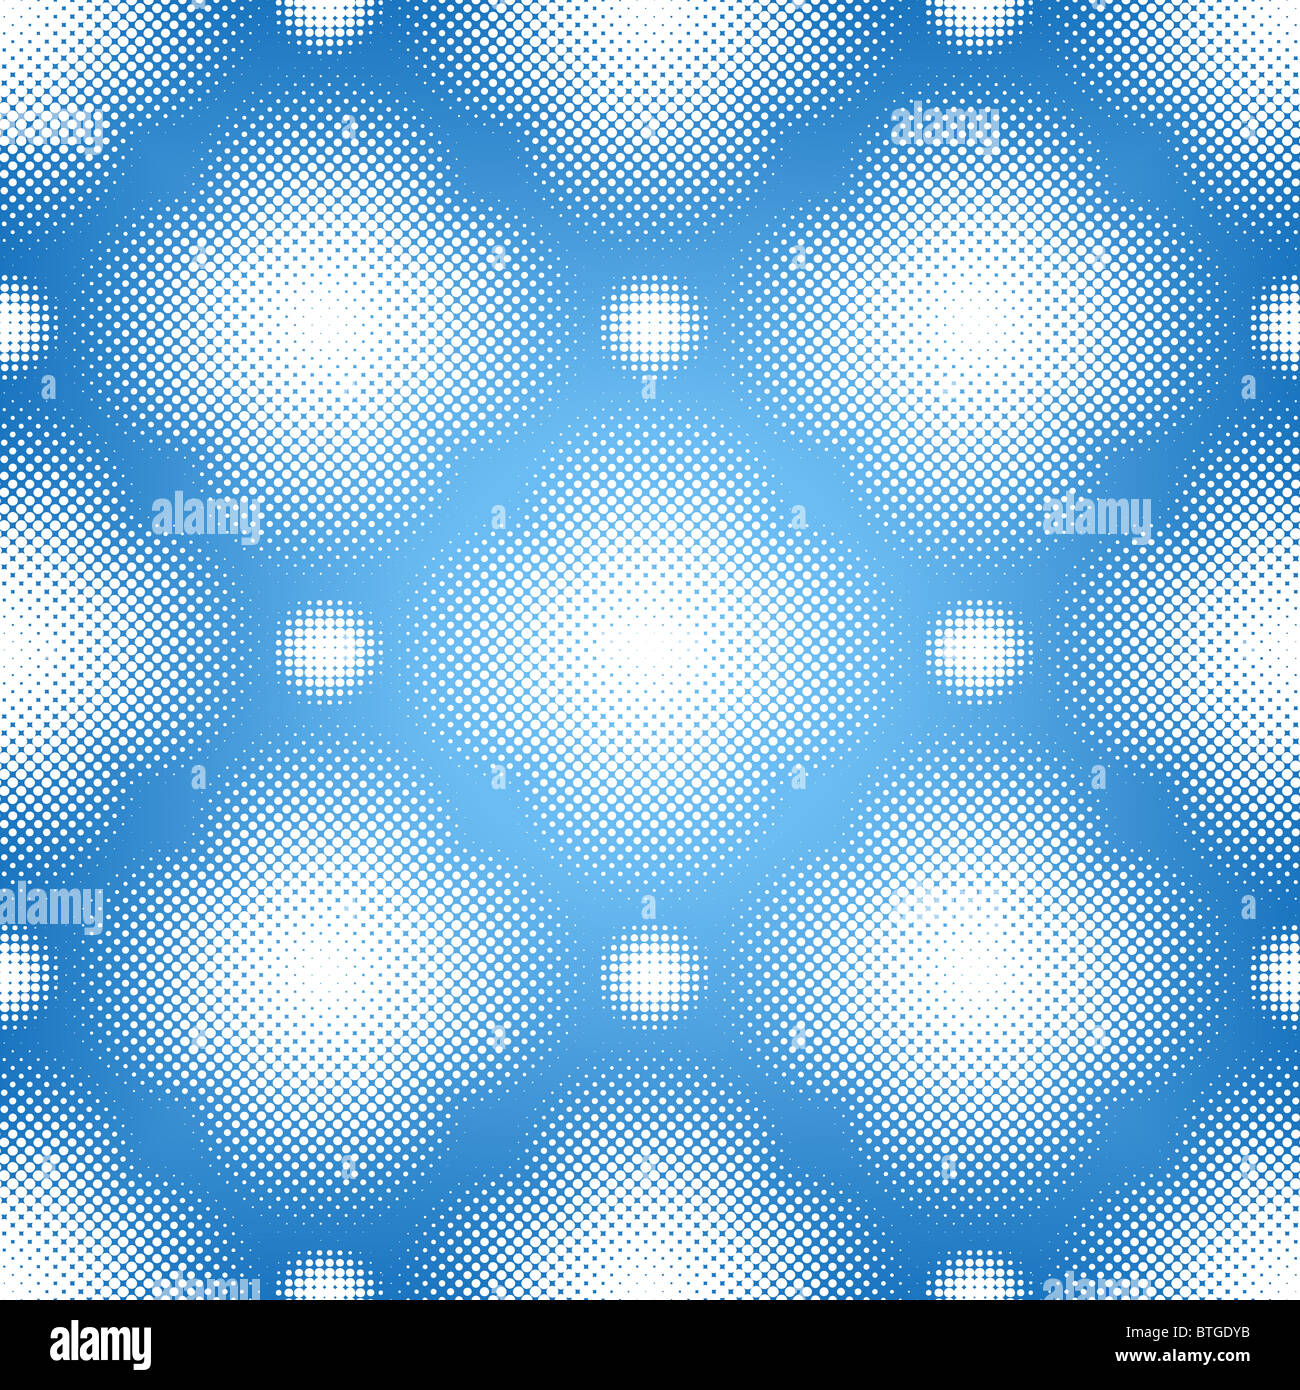 Illustrated seamless tile of a halftone pattern Stock Photo